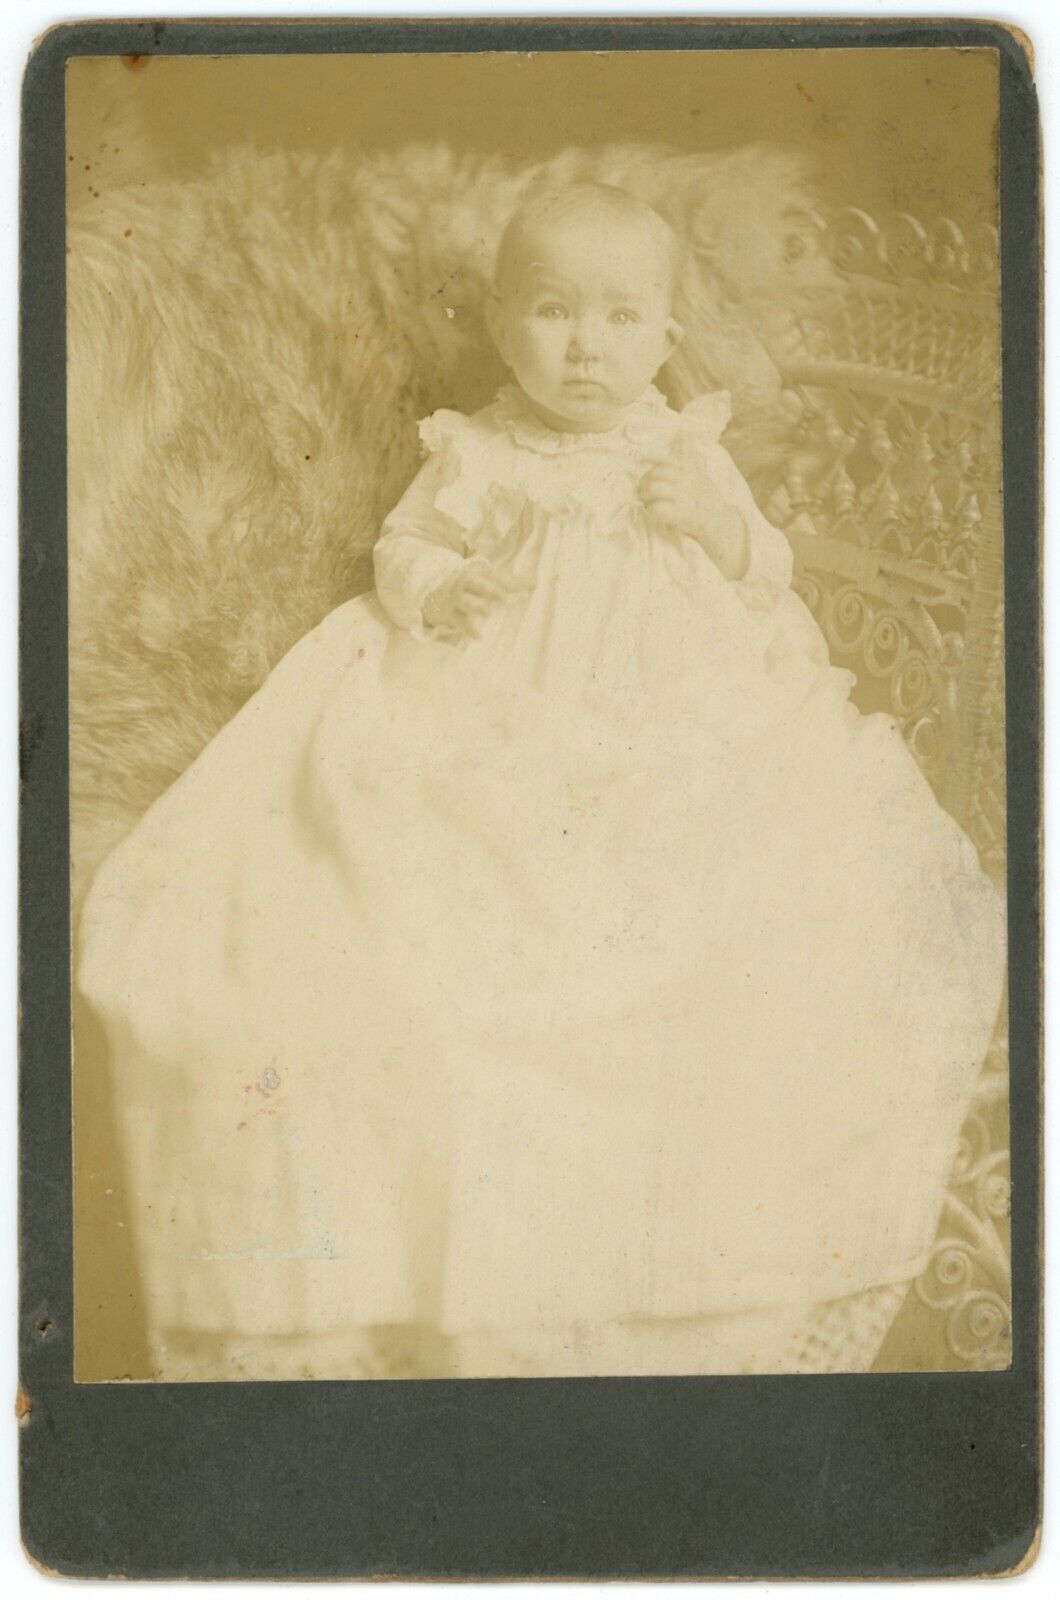 CIRCA 1890\'S CABINET CARD Adorable Little Baby In White Dress J.B. Parsons